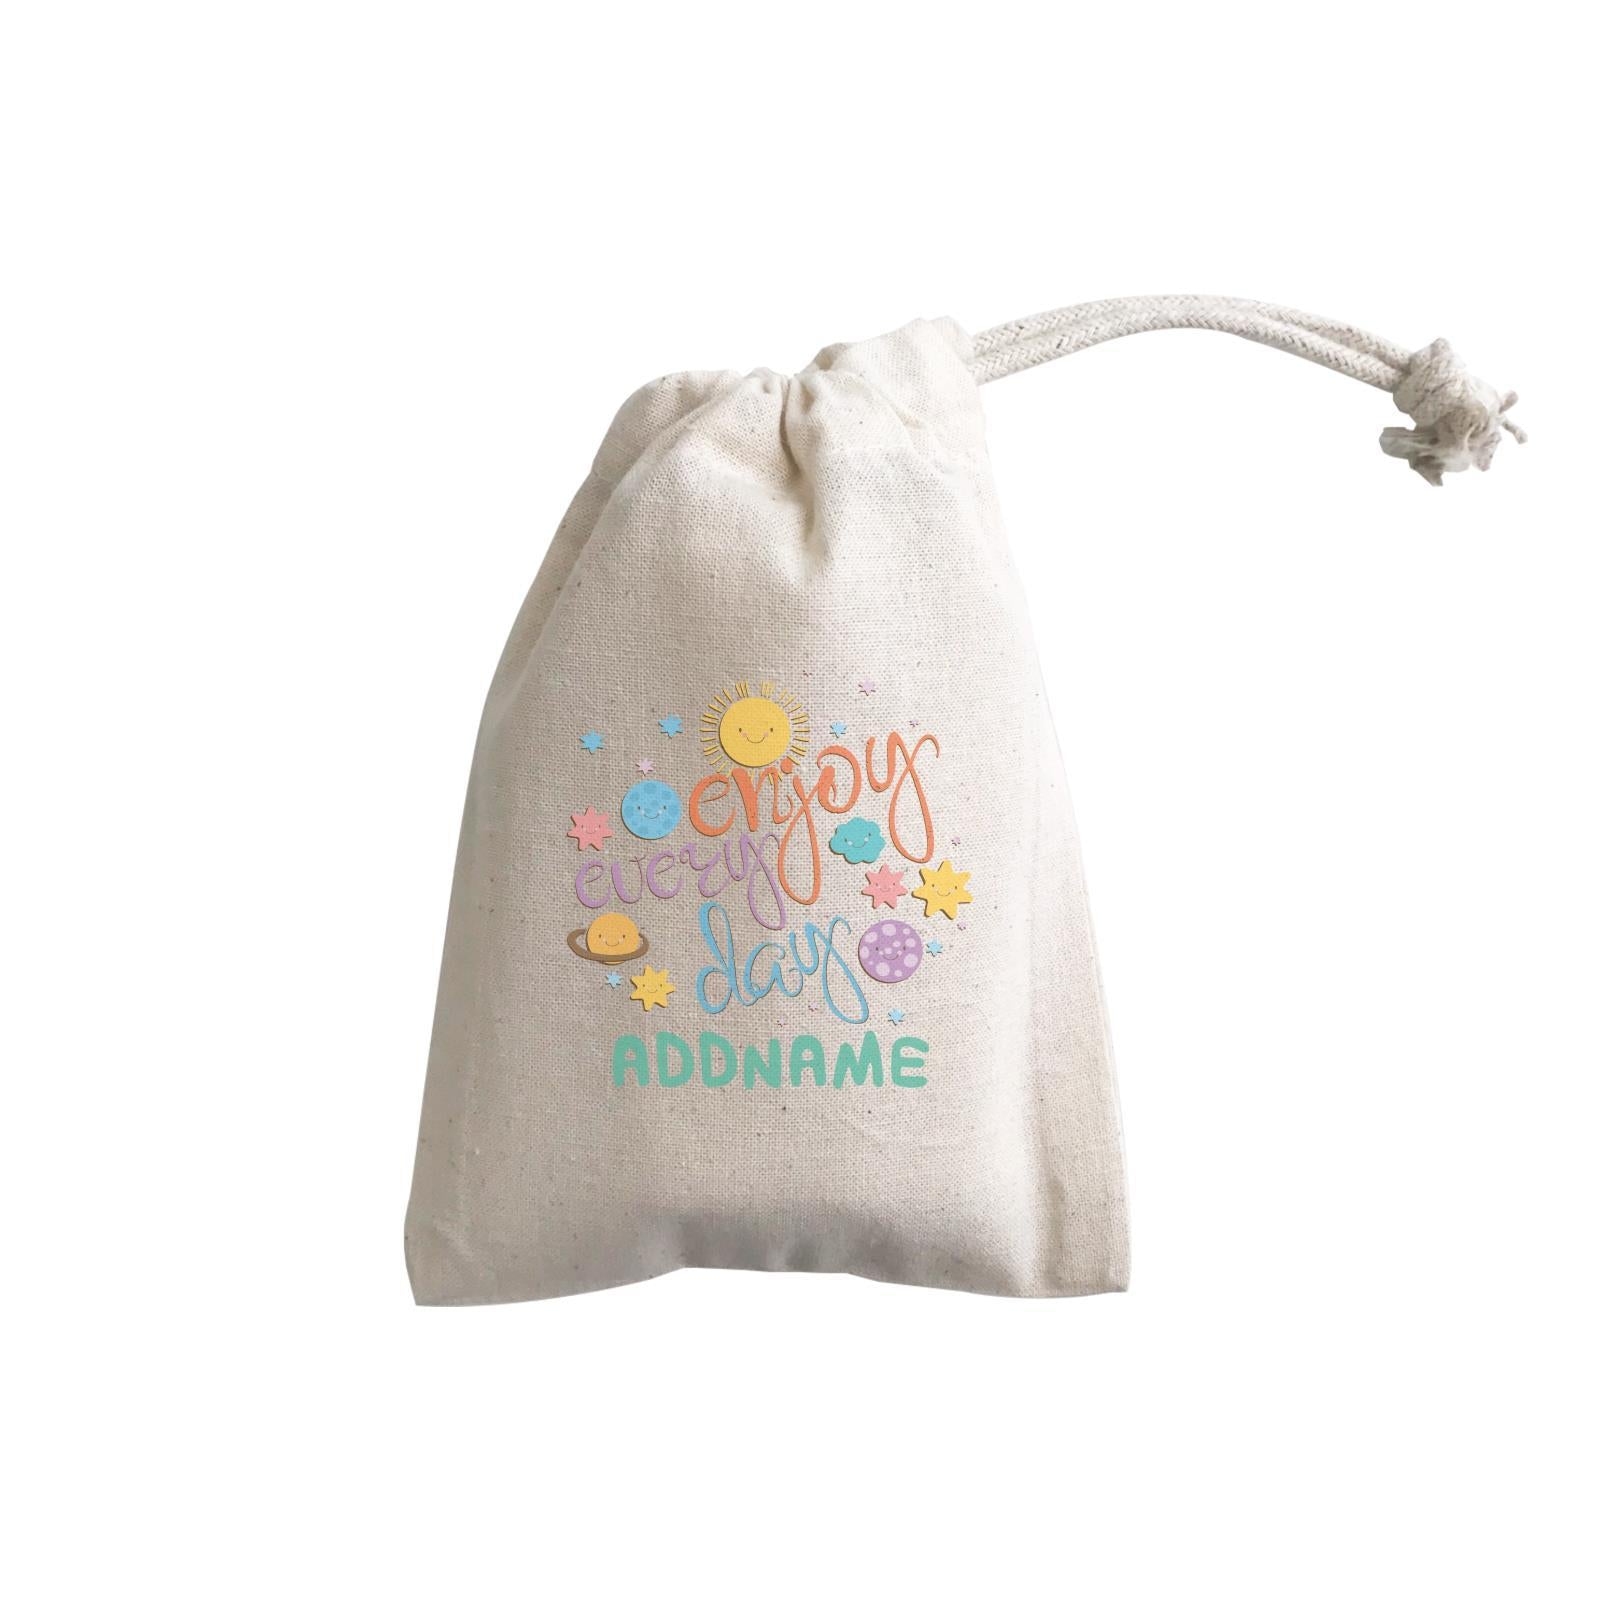 Children's Day Gift Series Enjoy Every Day Space Addname  Gift Pouch